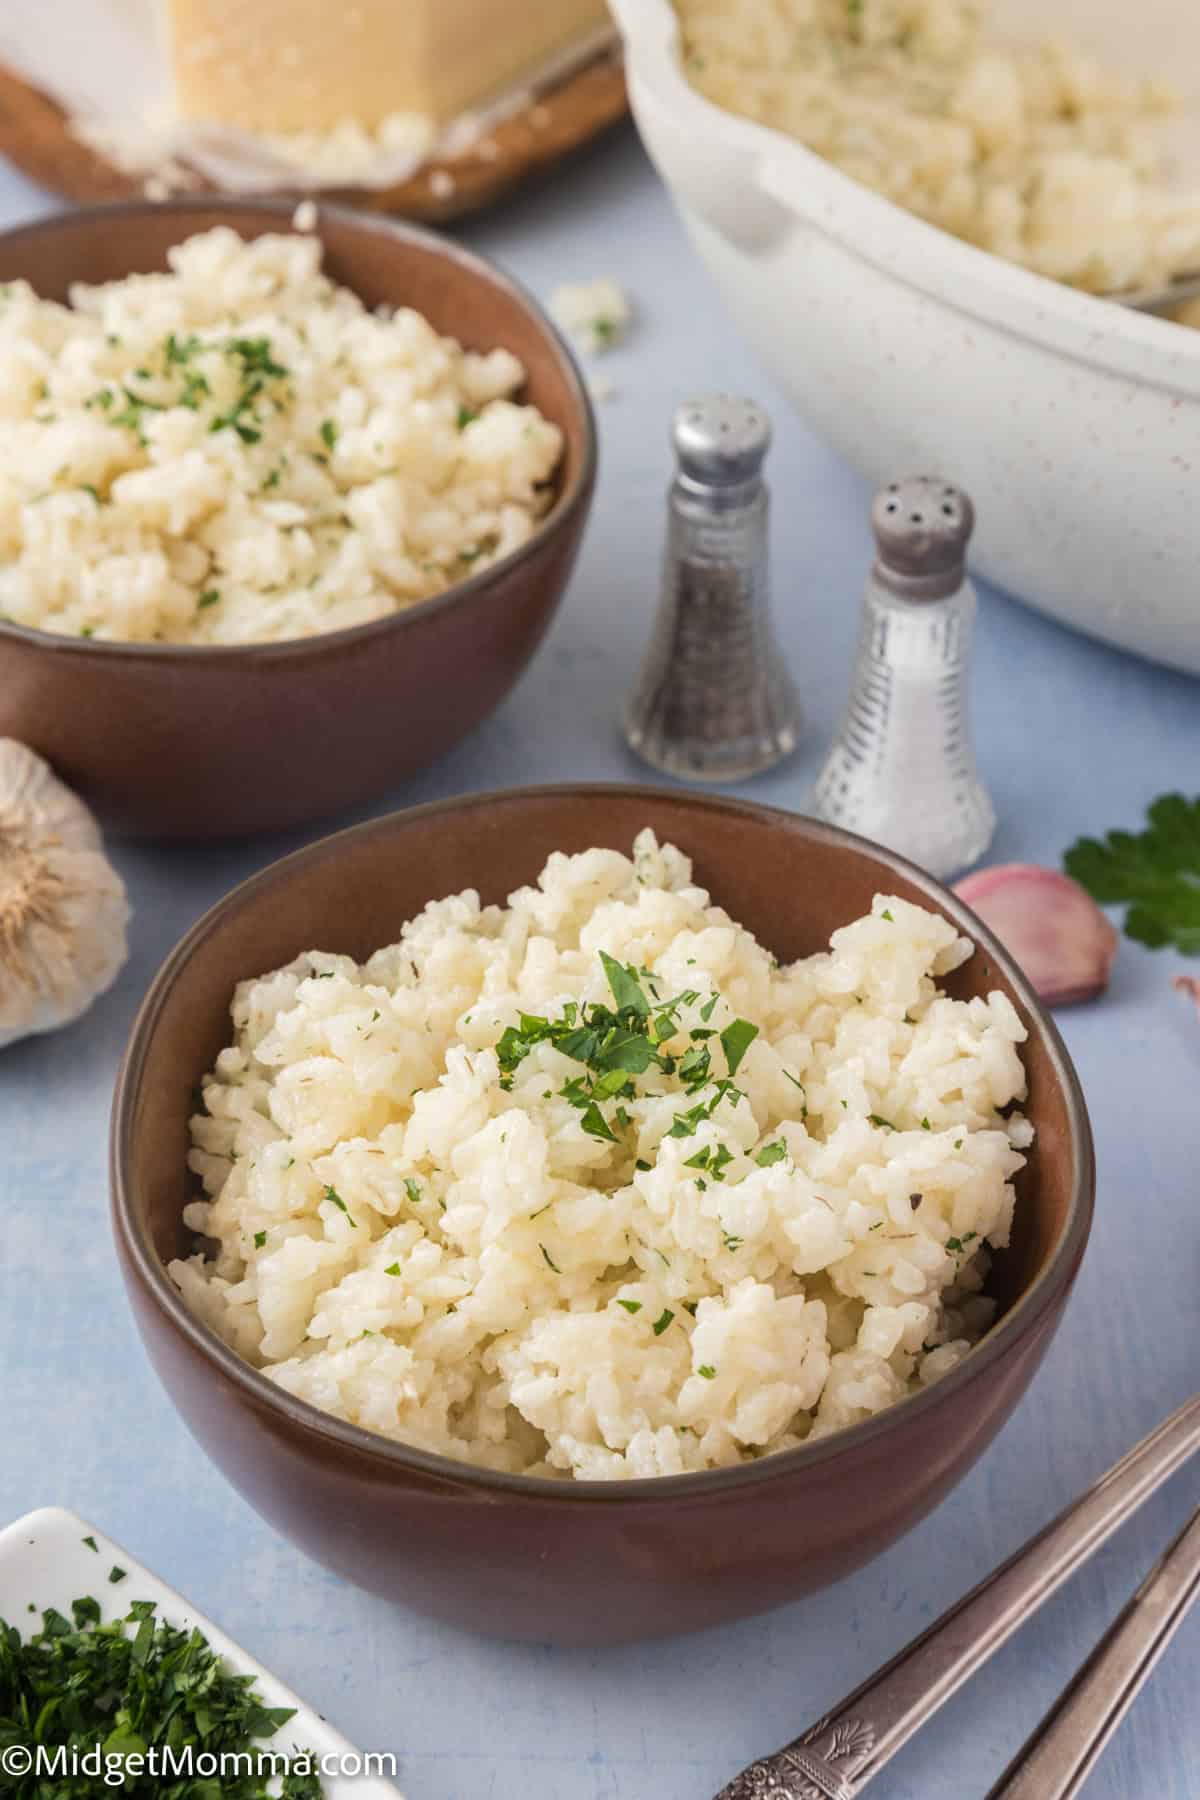 Two bowls of creamy rice garnished with herbs on a blue tablecloth, with garlic cloves and a cheese wheel in the background.